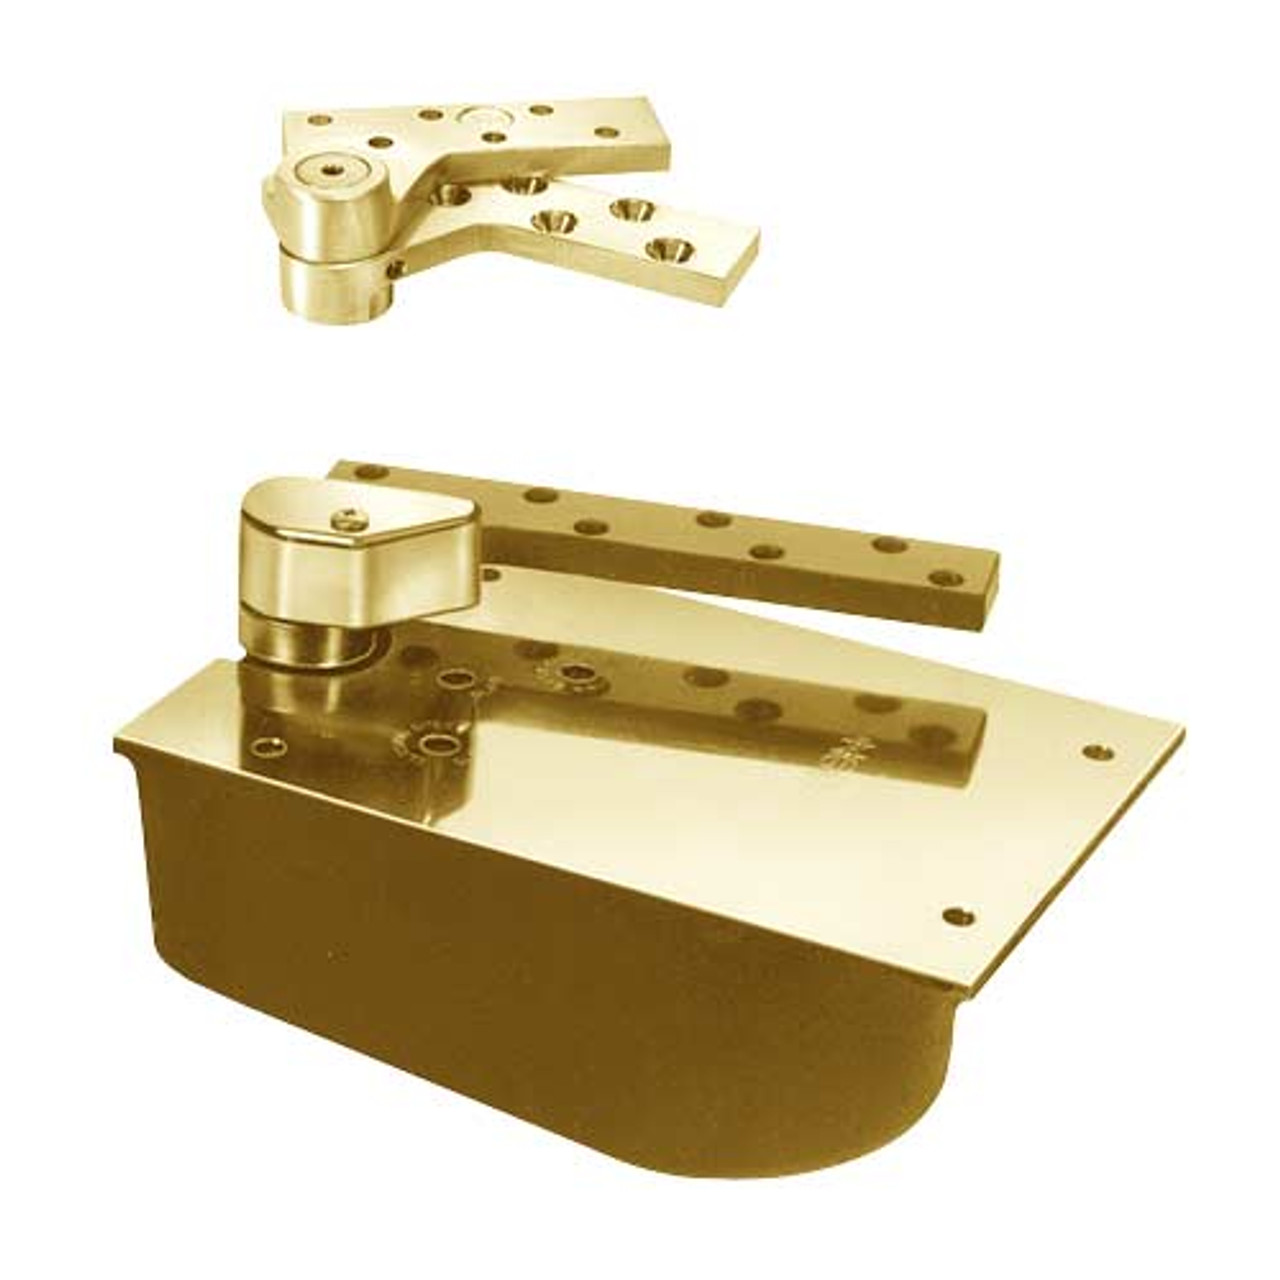 PHL27-95S-RH-605 Rixson 27 Series Extra Heavy Duty Lead Lined Offset Floor Closer in Bright Brass Finish